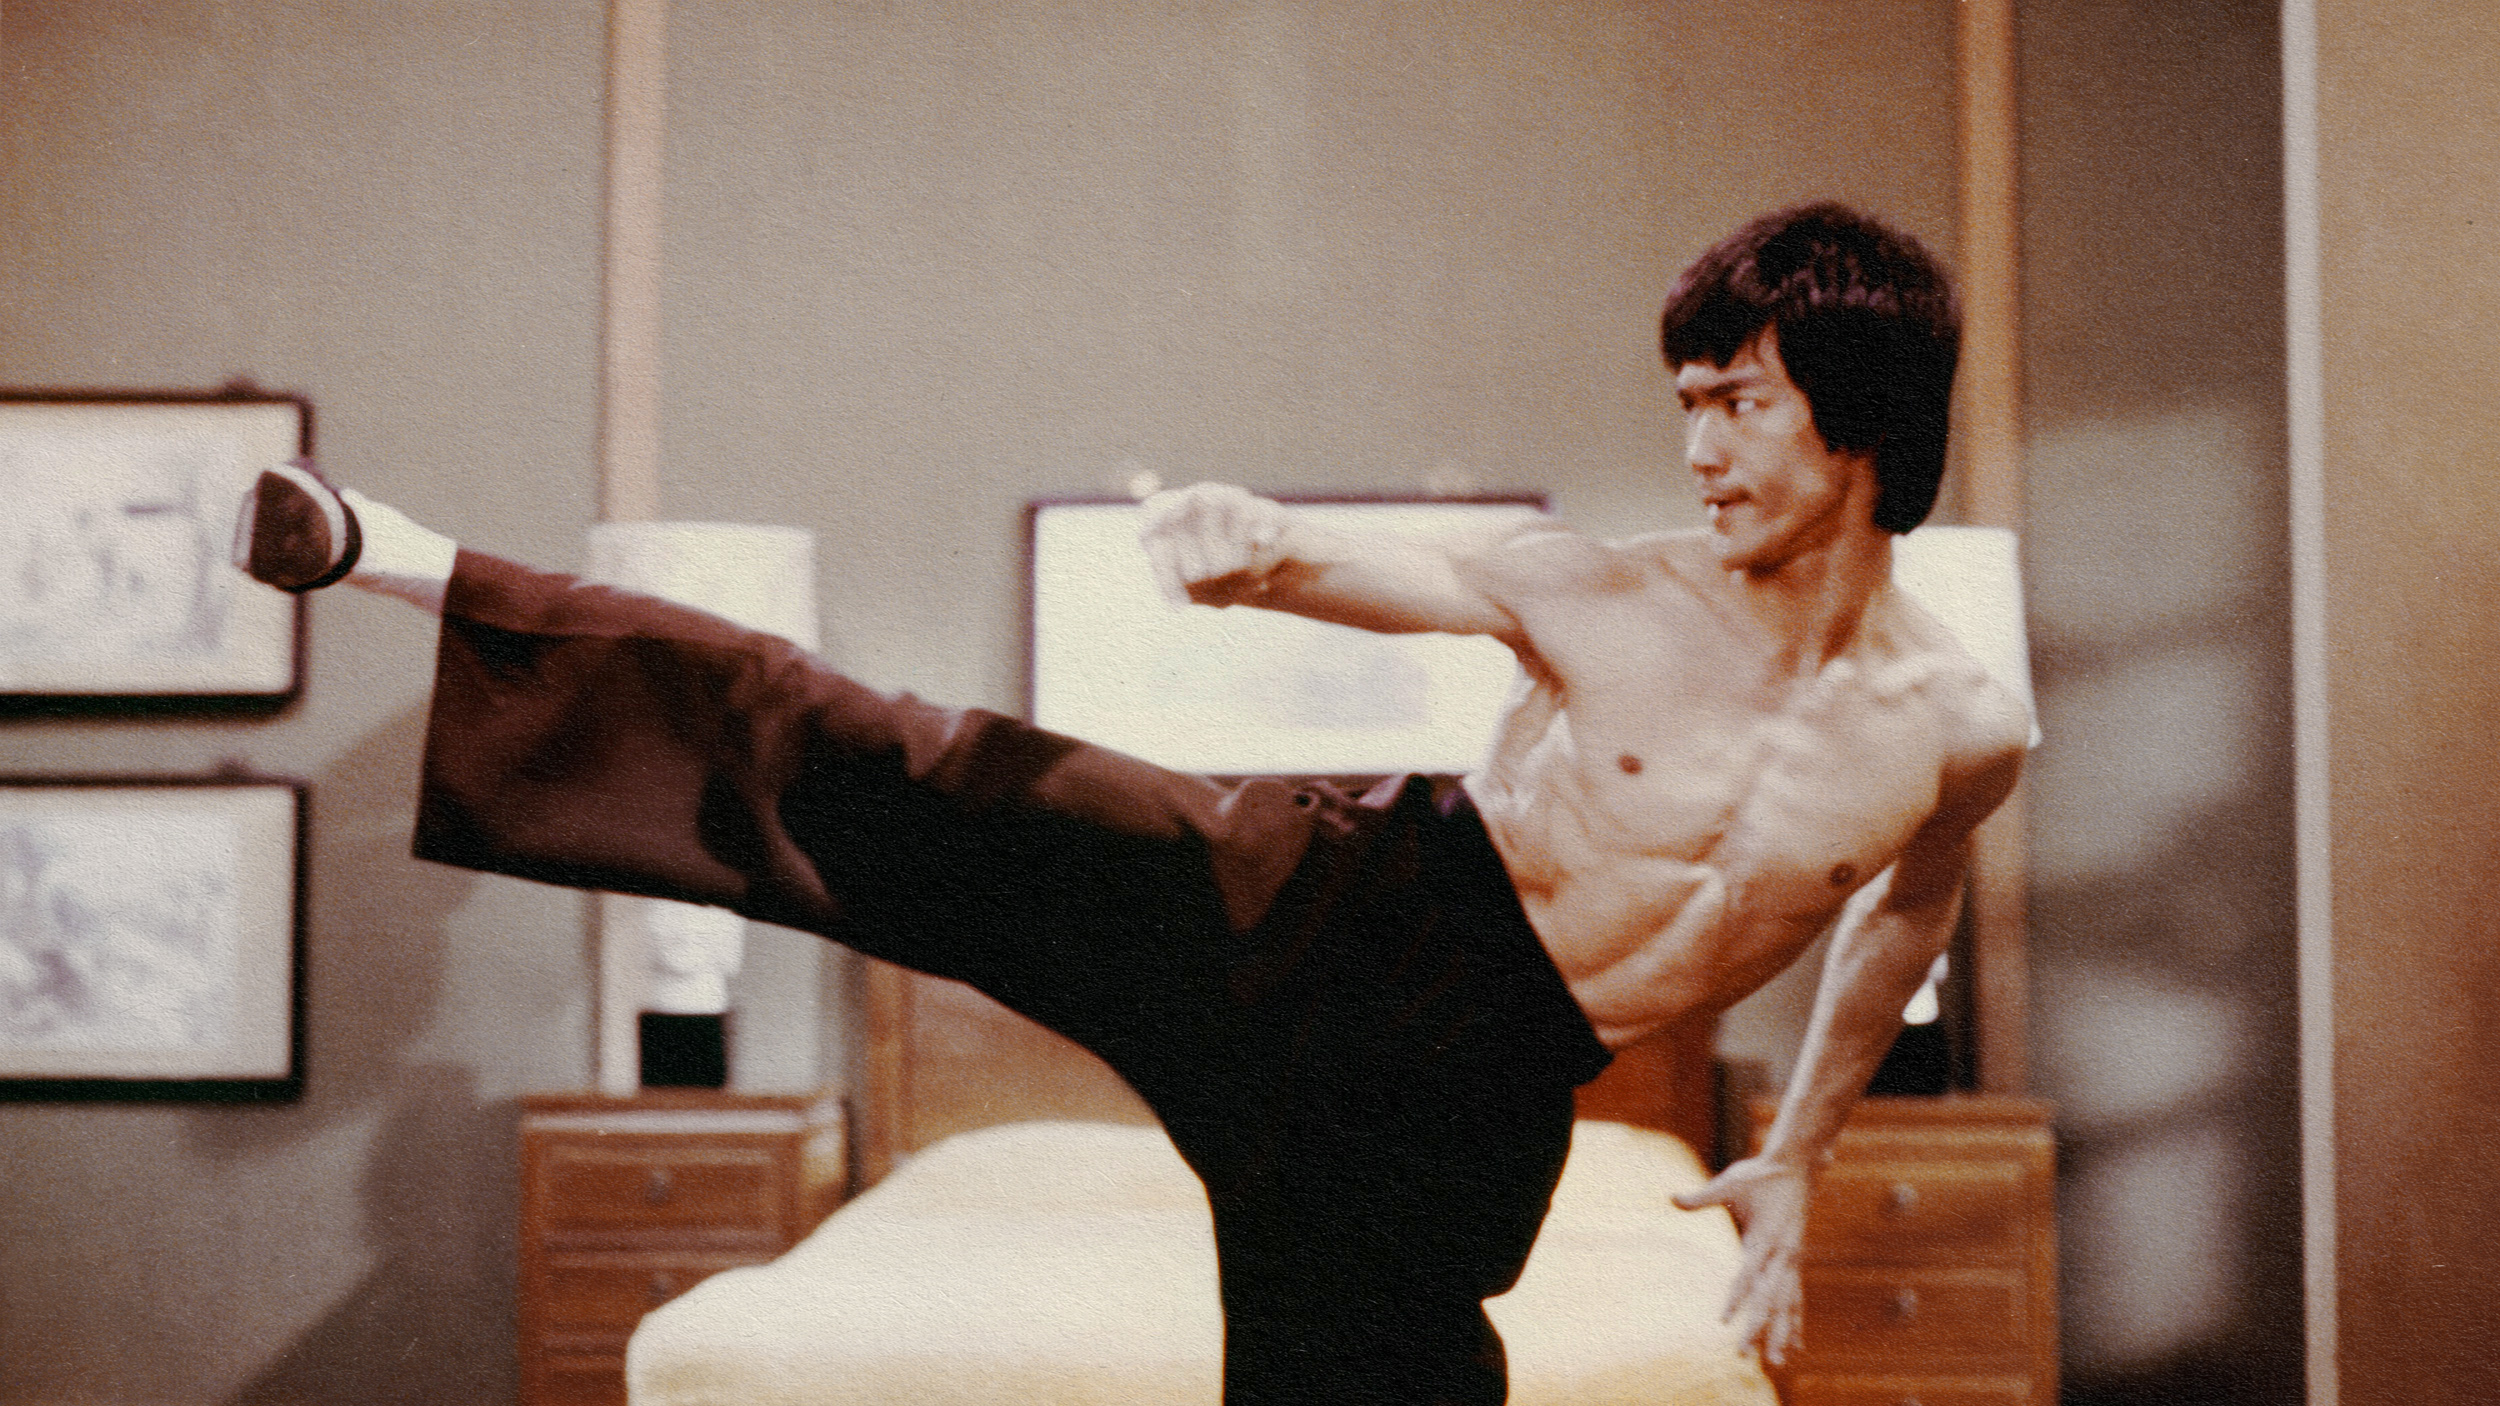 Bruce Lee executing a pain-free kick in a bedroom.